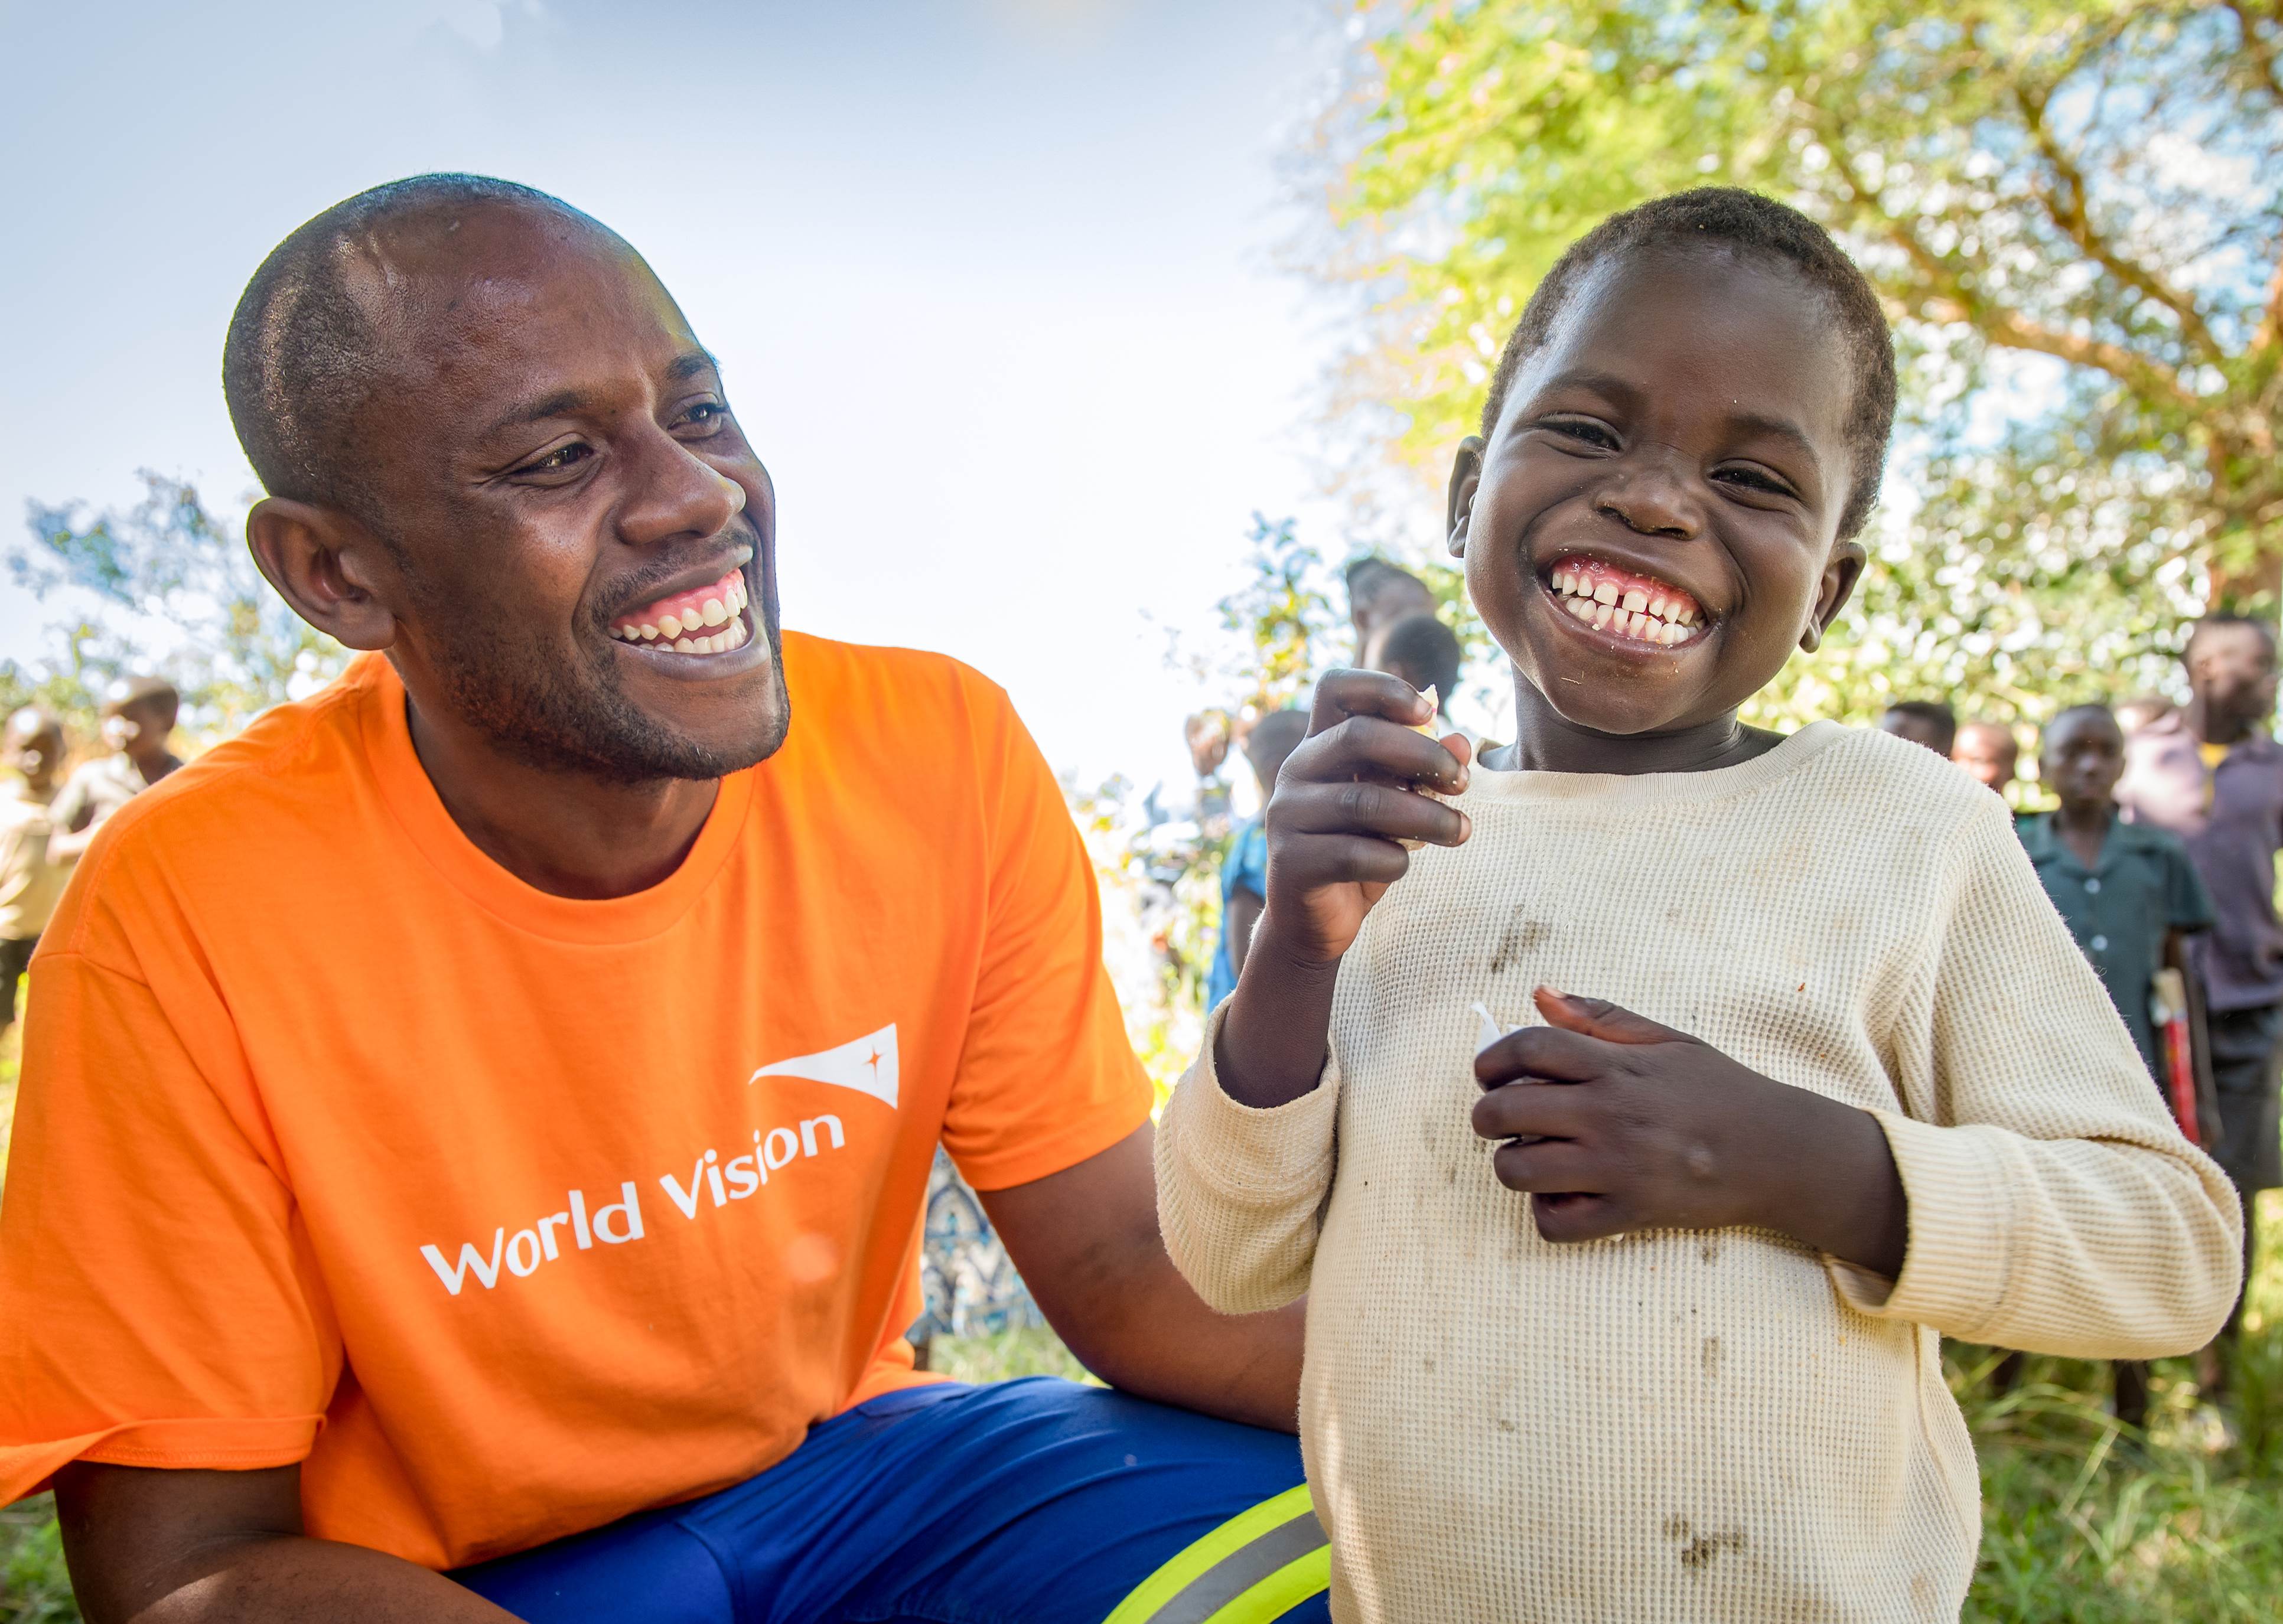 A male staff member in a World Vision orange tshirt smiling while crouching next to a child who is smiling to the camera